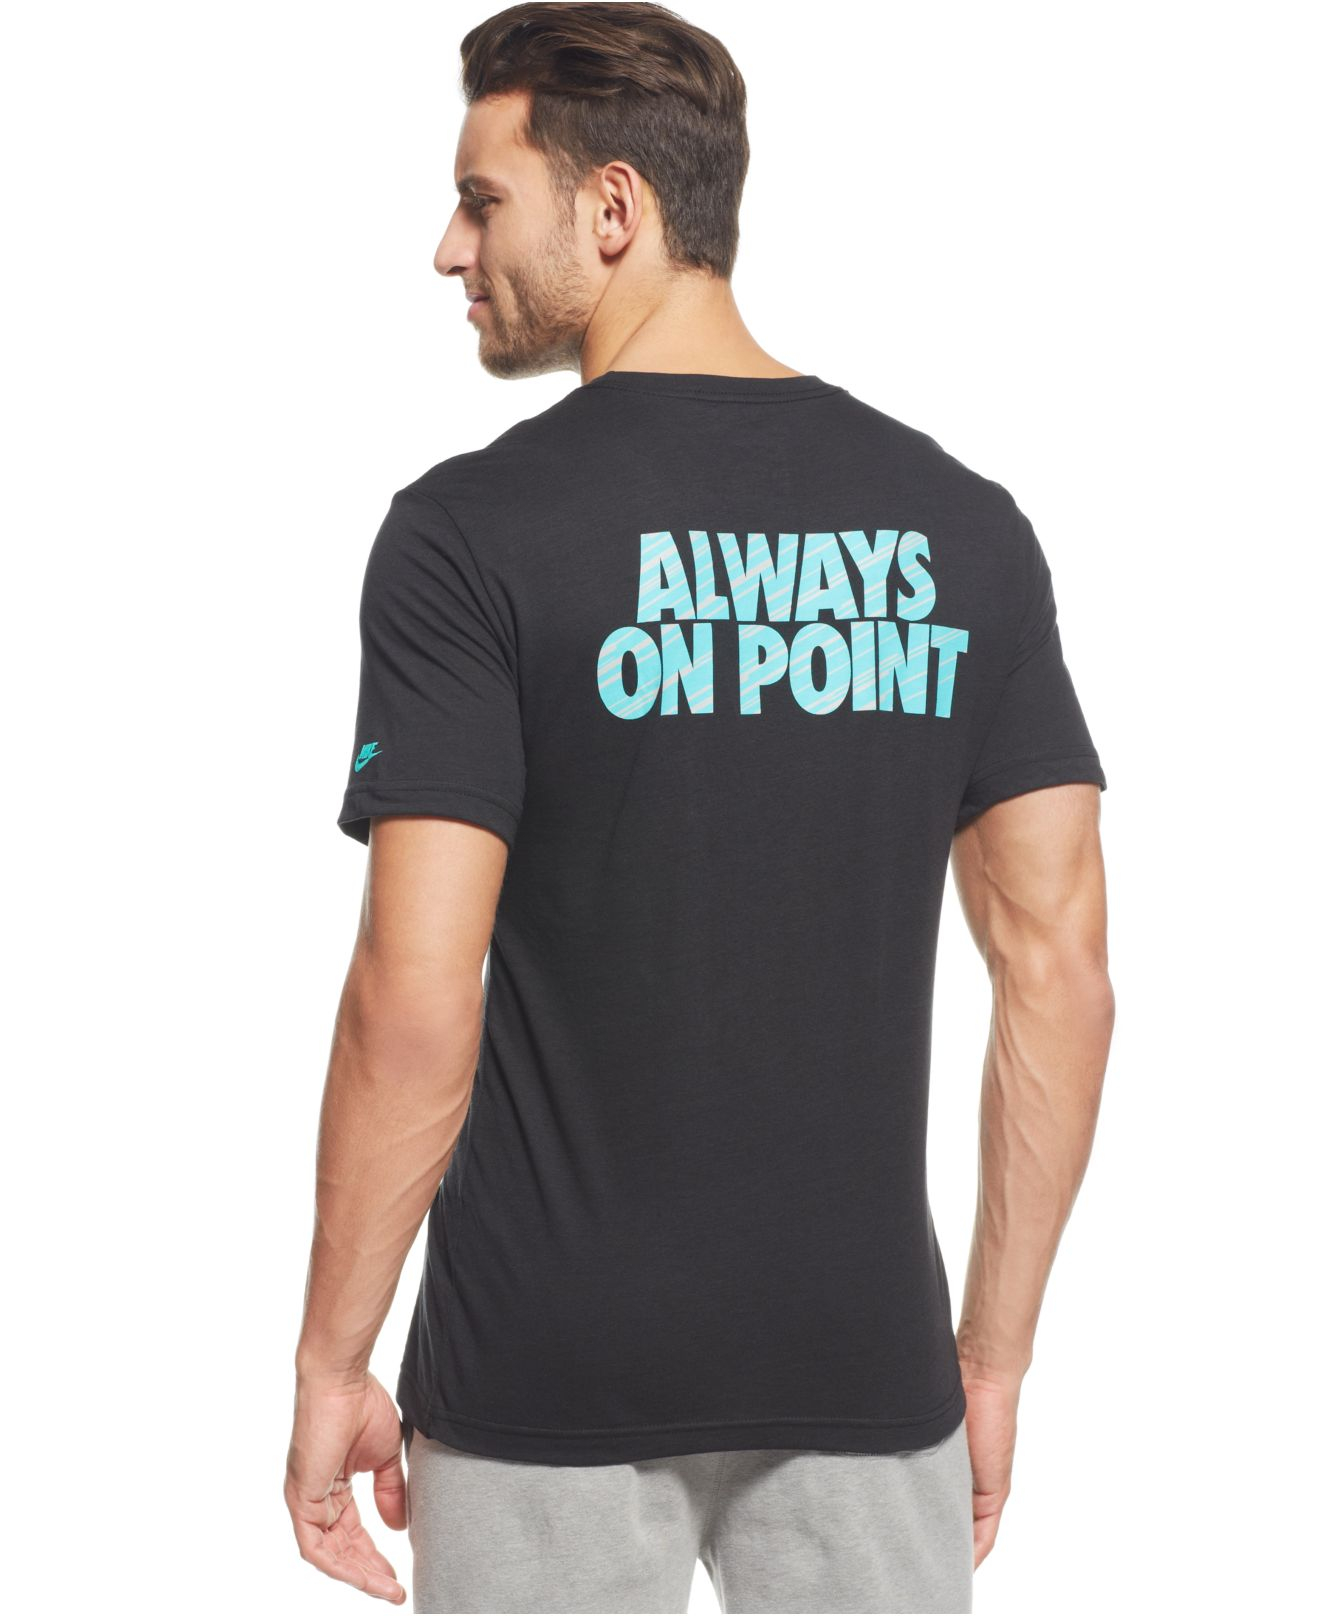 Nike Never On Time Always On Point T-Shirt in Black for Men - Lyst